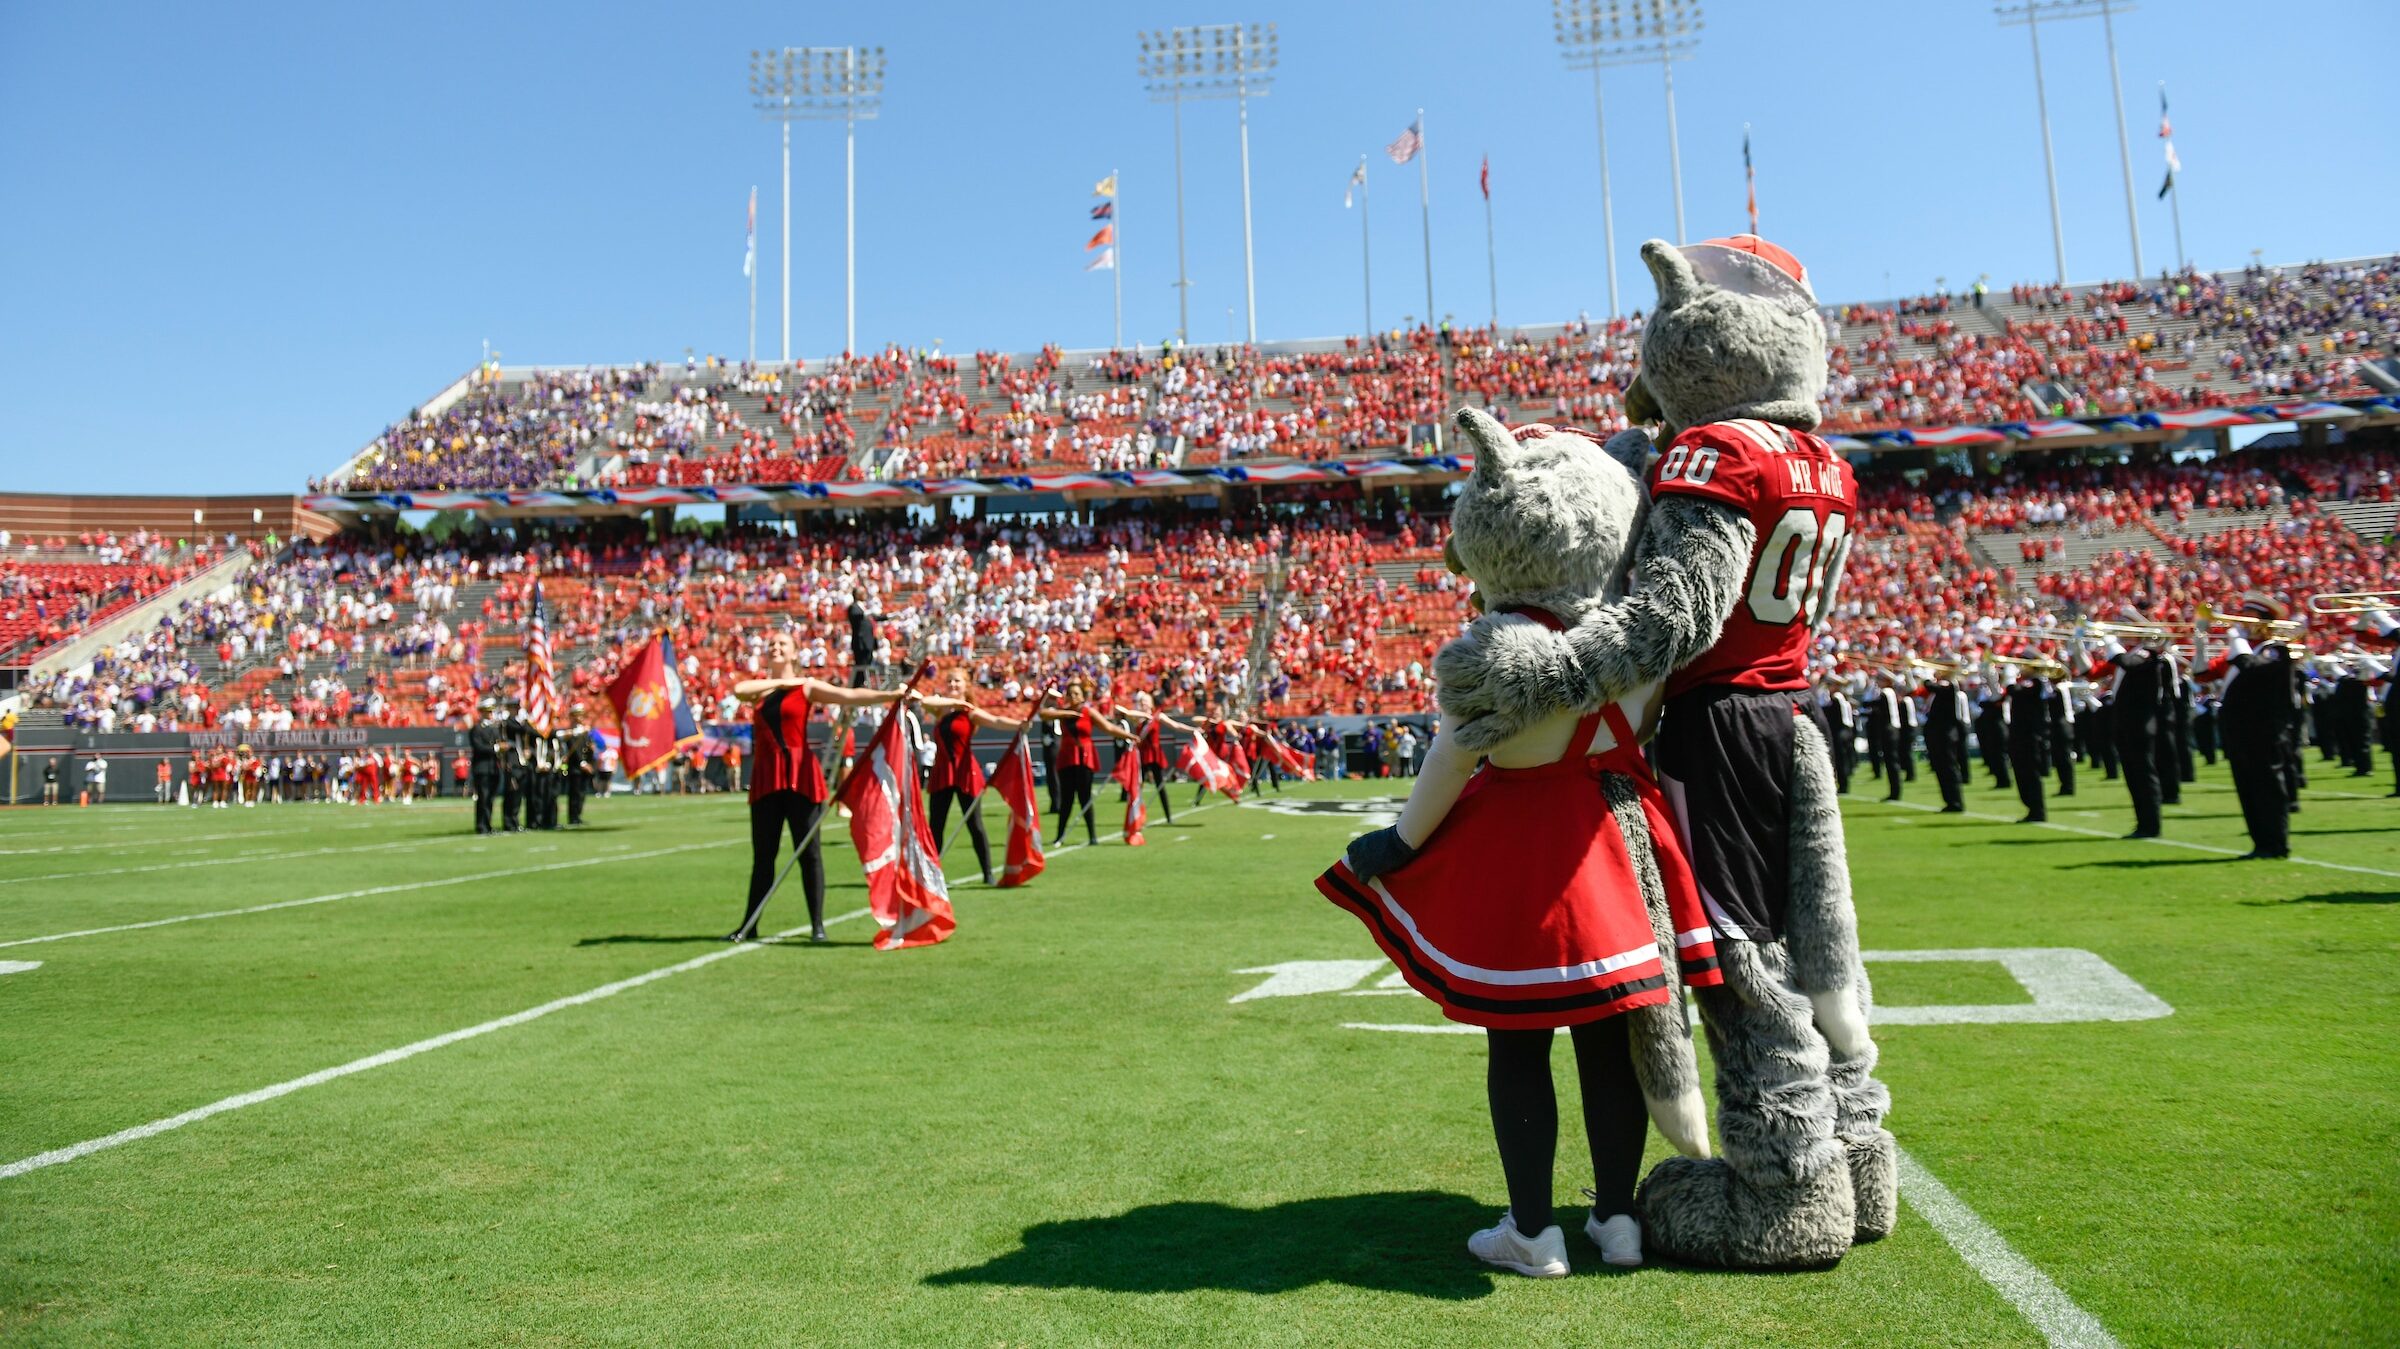 Mr. and Ms. Wuf share a moment at Carter Finely Stadium.